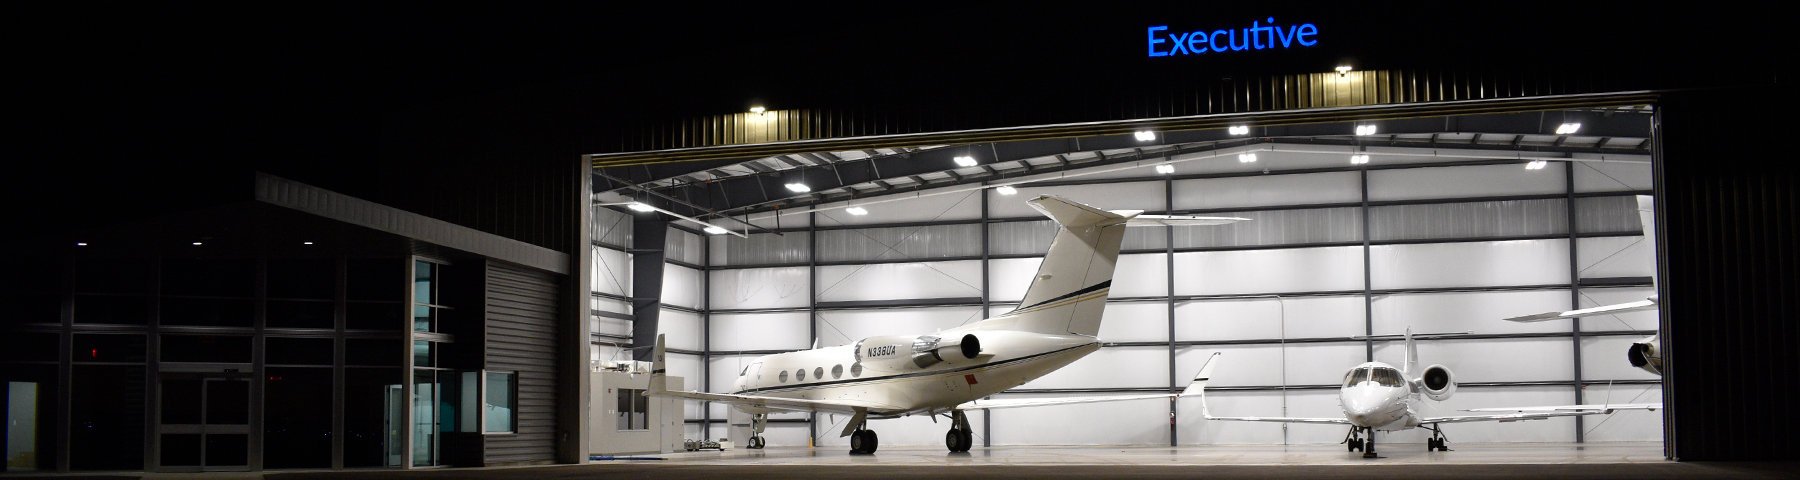 Executive Air Tucson - General Aviation and Private Aviation FBO at Tucson International Airport (KTUS) - Based and Transient Aircraft Hangars